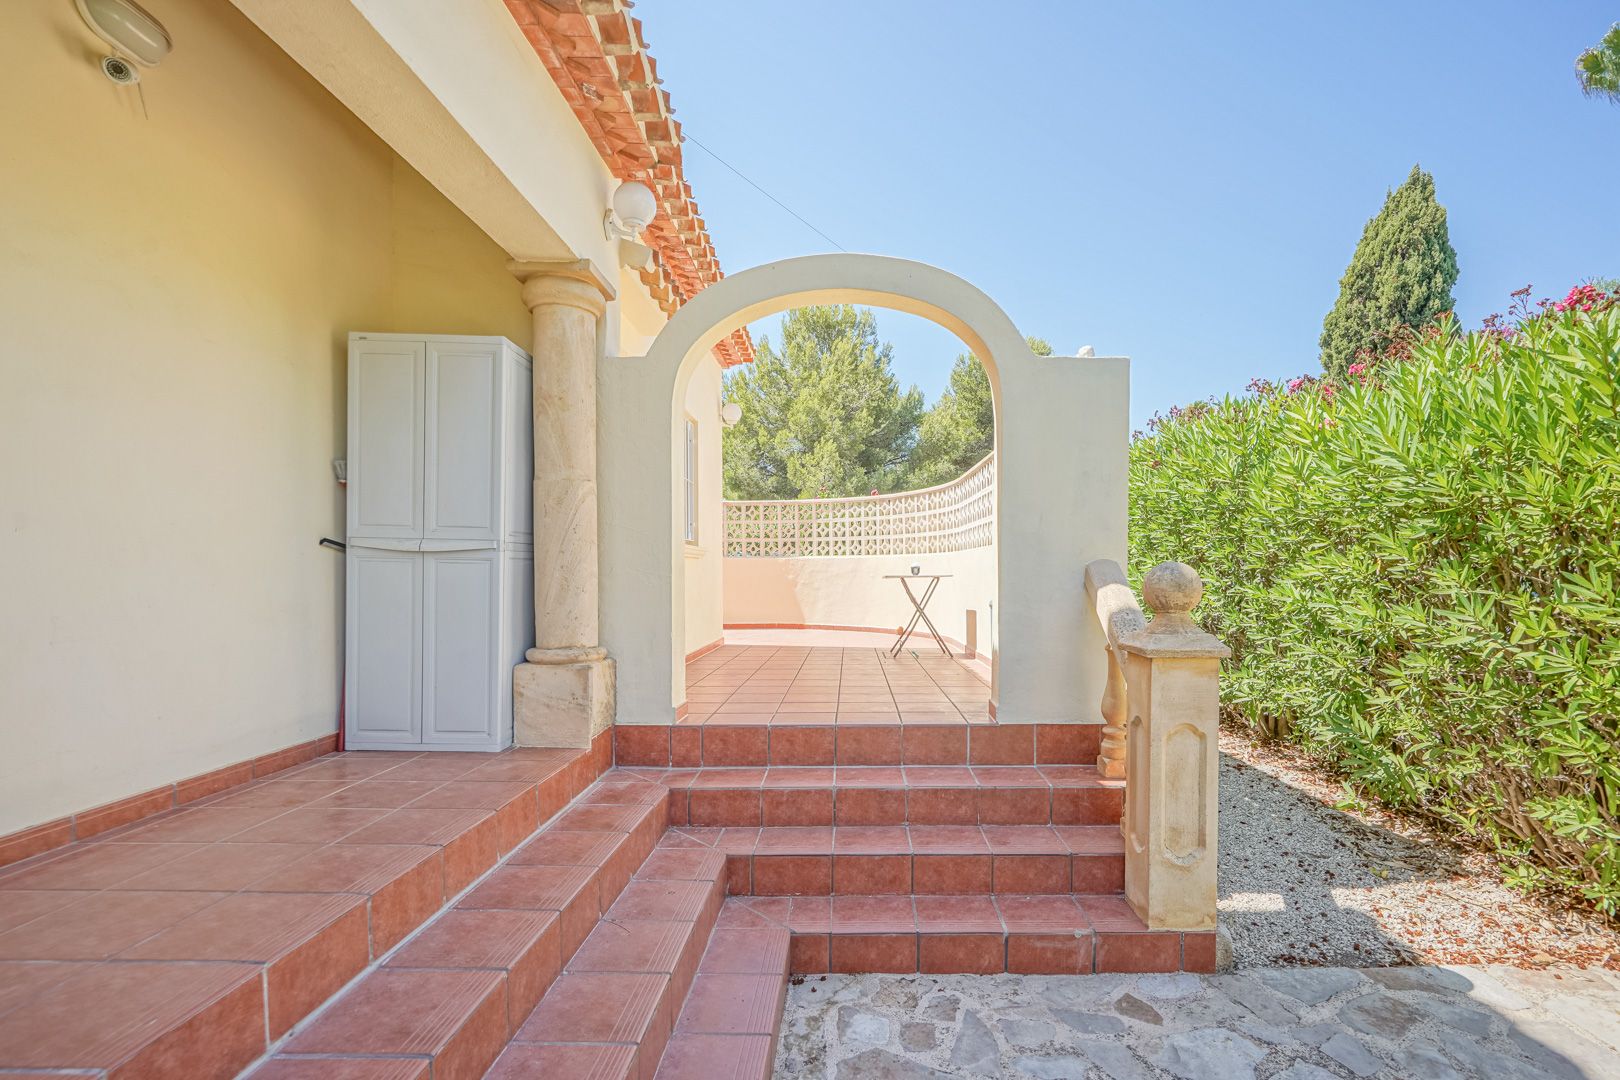 Beautiful and spacious villa with detached guest house for sale near the golf course in Jávea